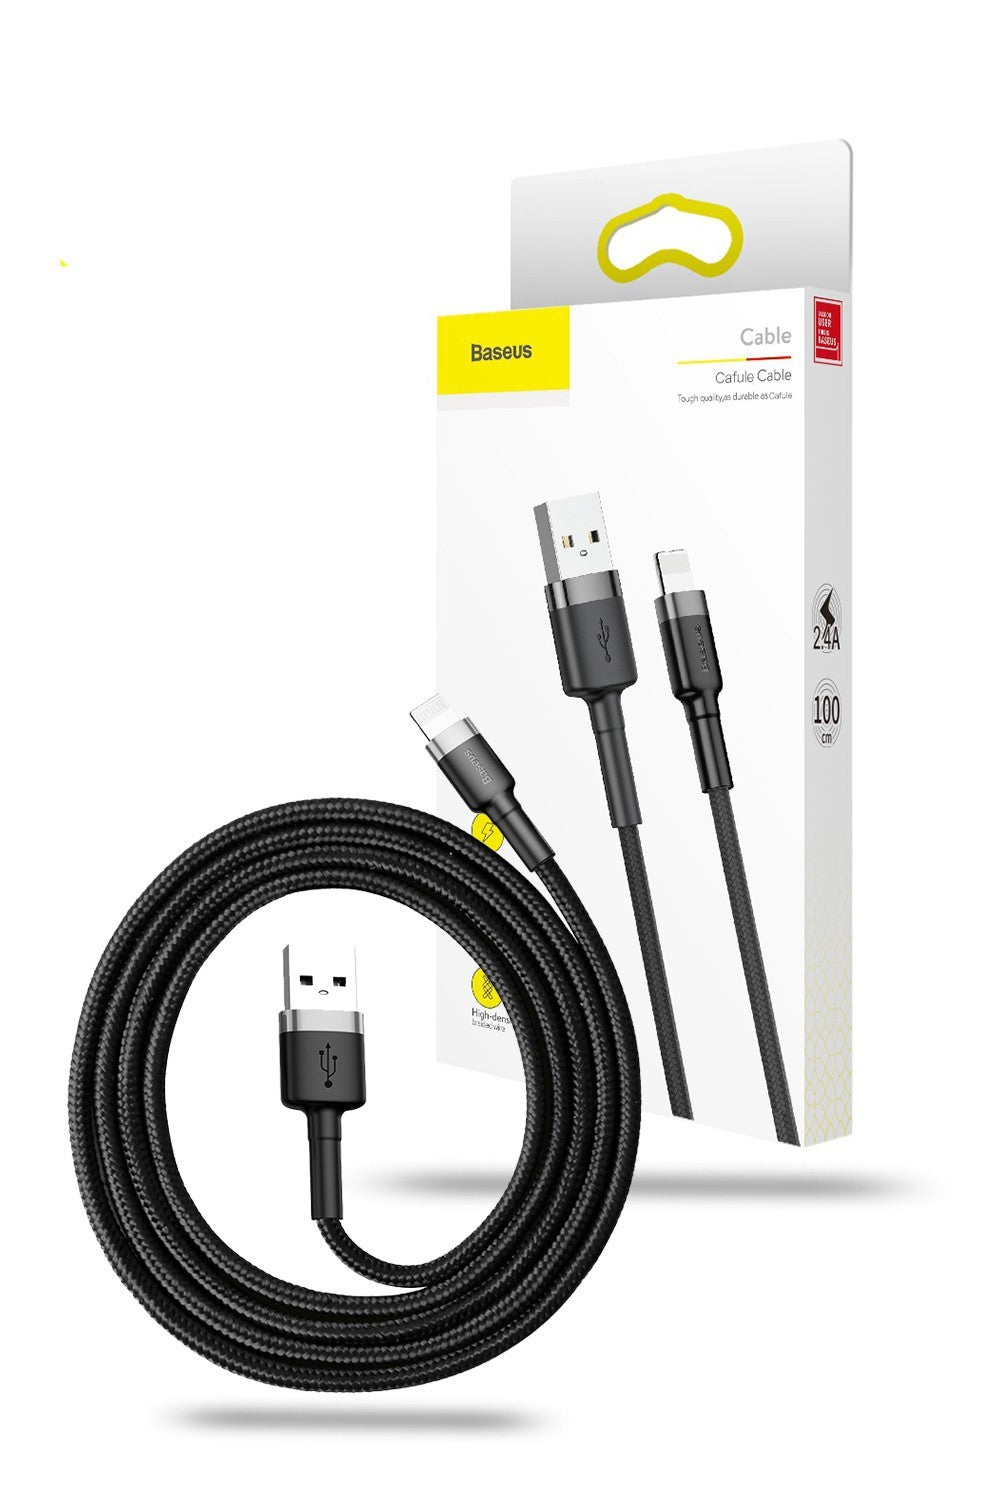 Baseus Cafule Tough Lightning Cable for iPhone iPad